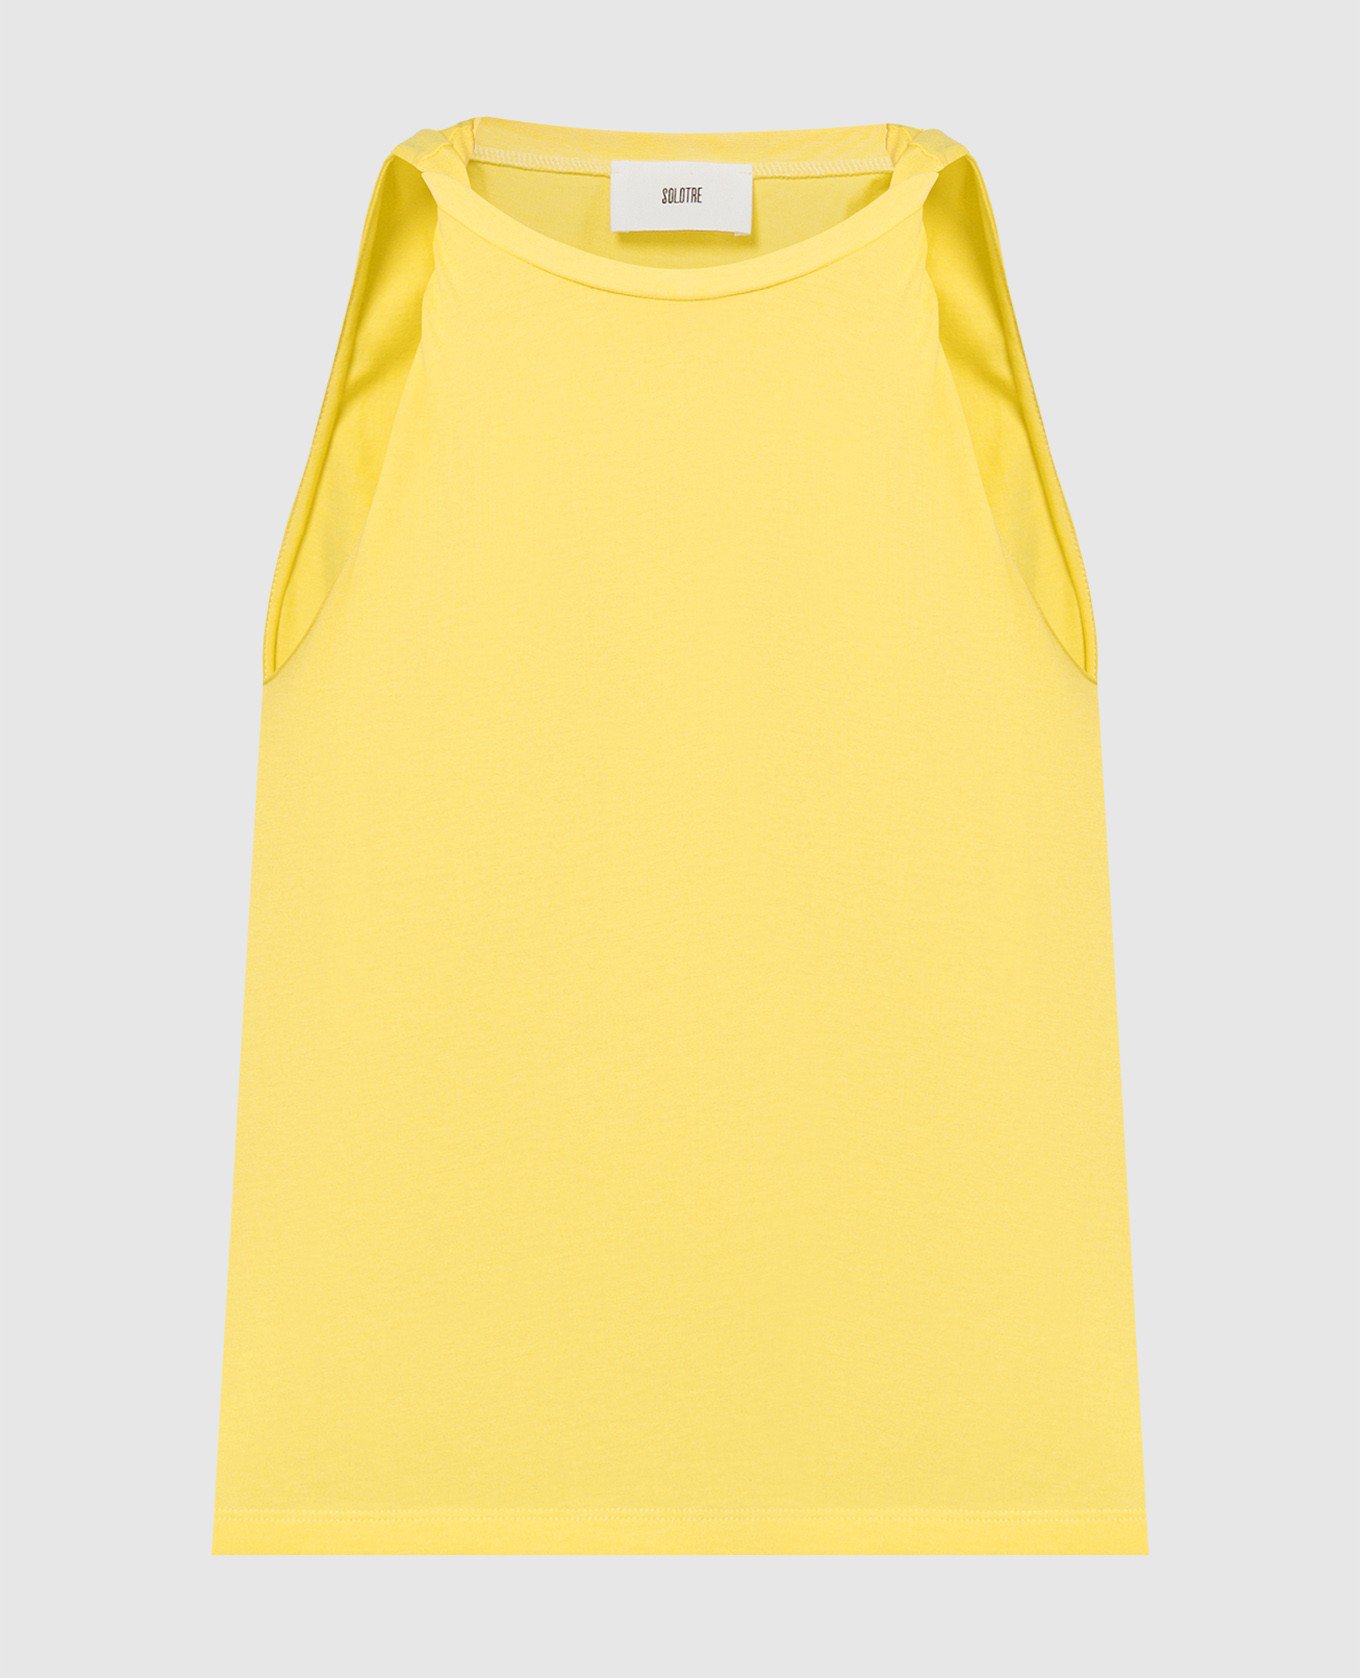 Yellow top with accent razors